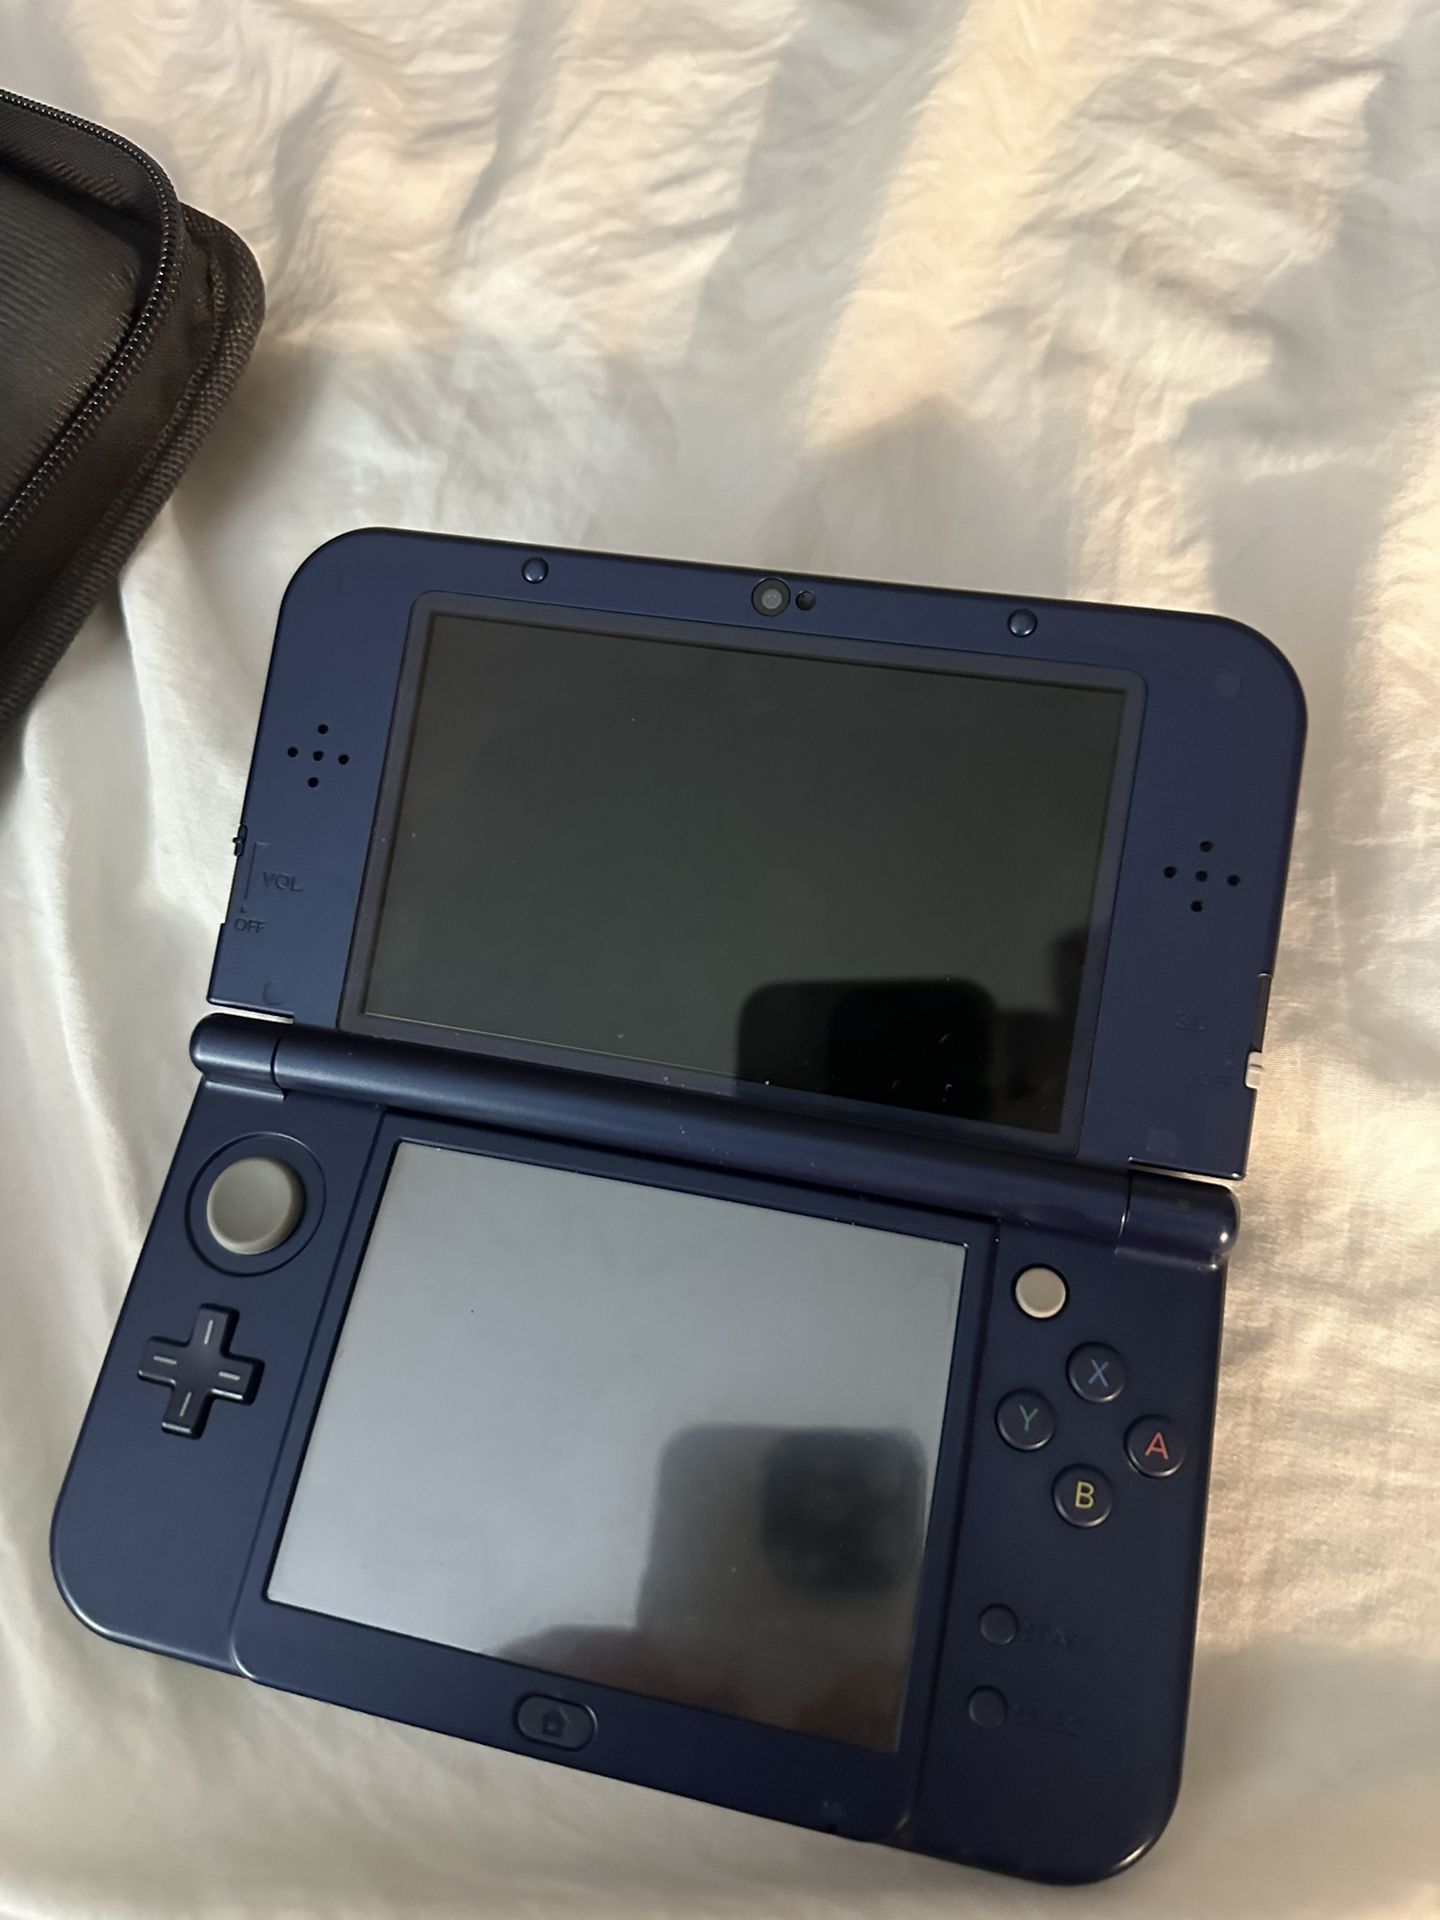 New Nintendo 3ds Xl For Sale Or Trade 